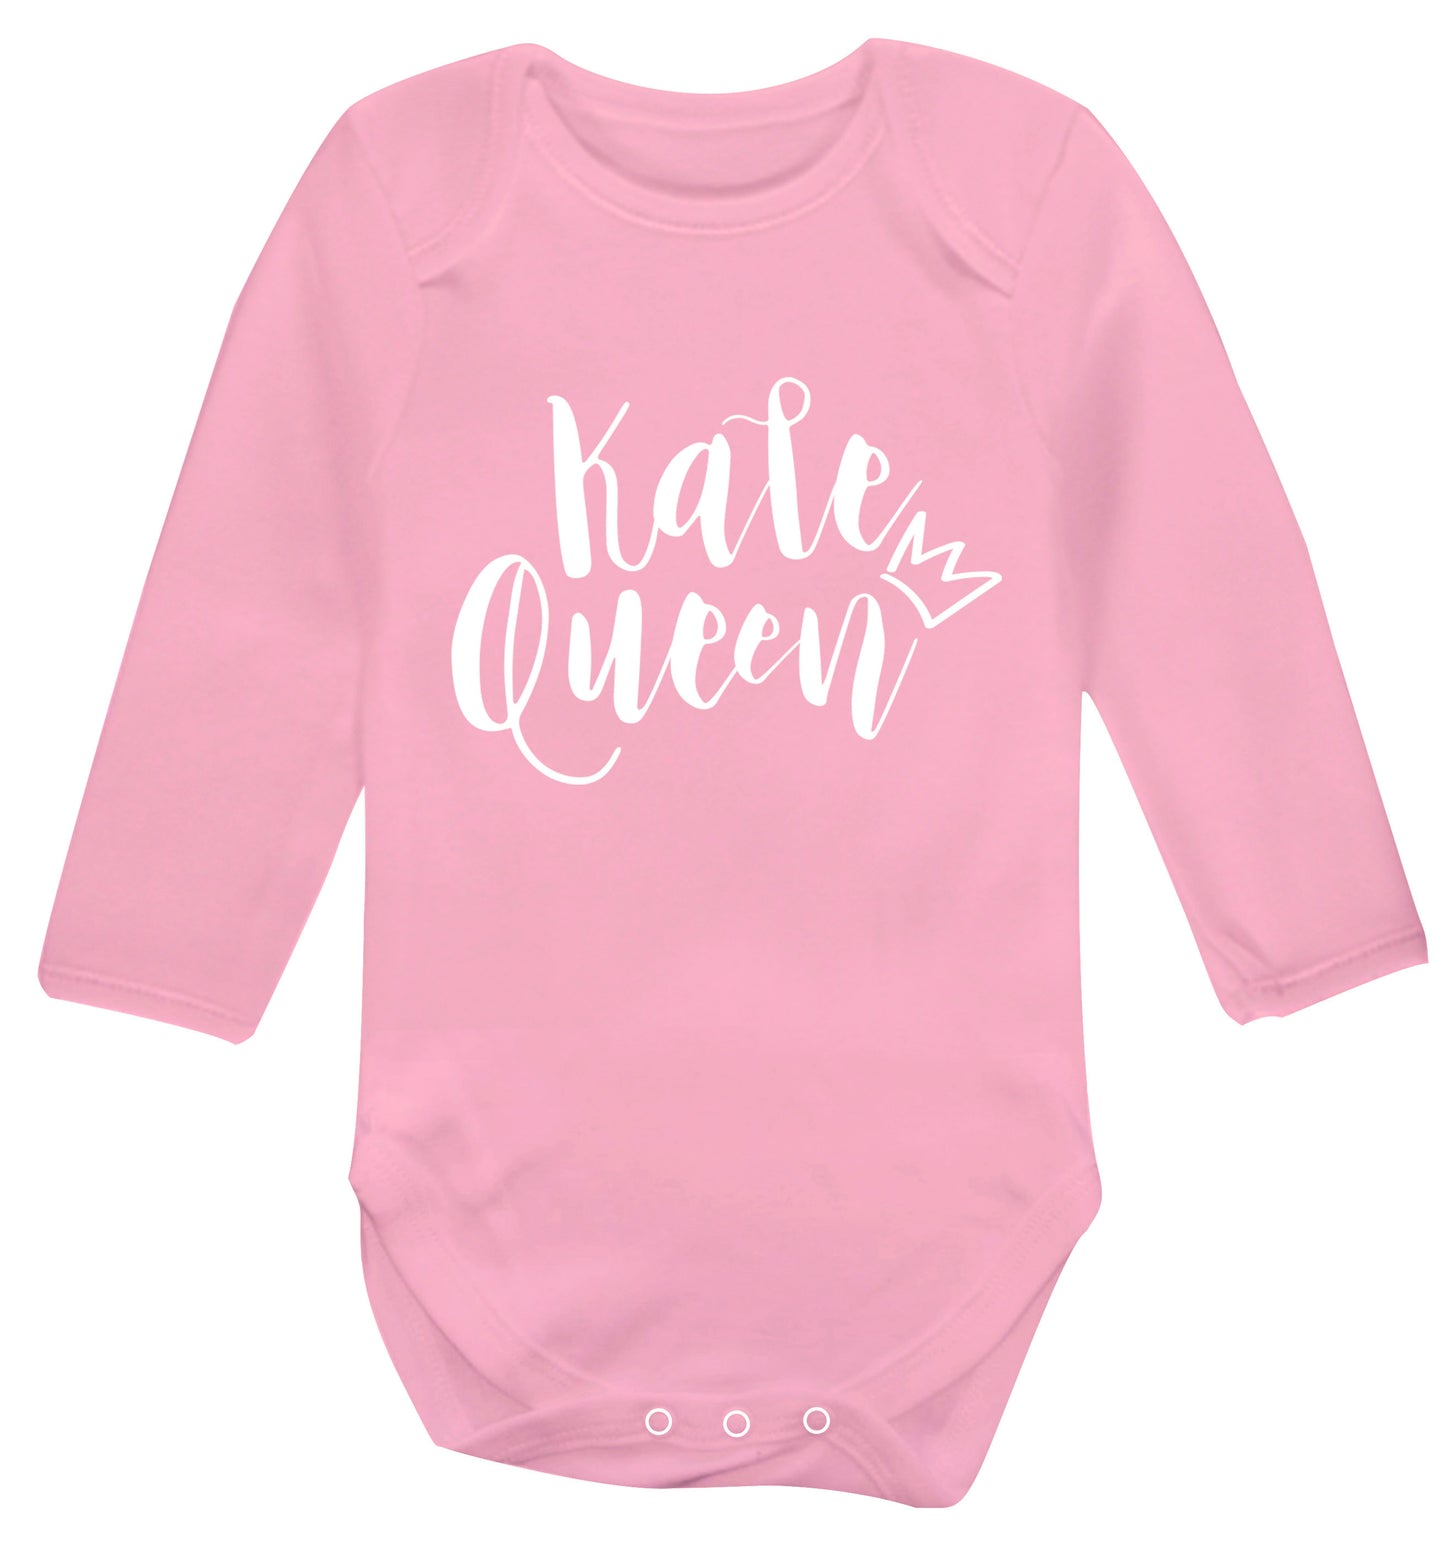 Kale Queen Baby Vest long sleeved pale pink 6-12 months